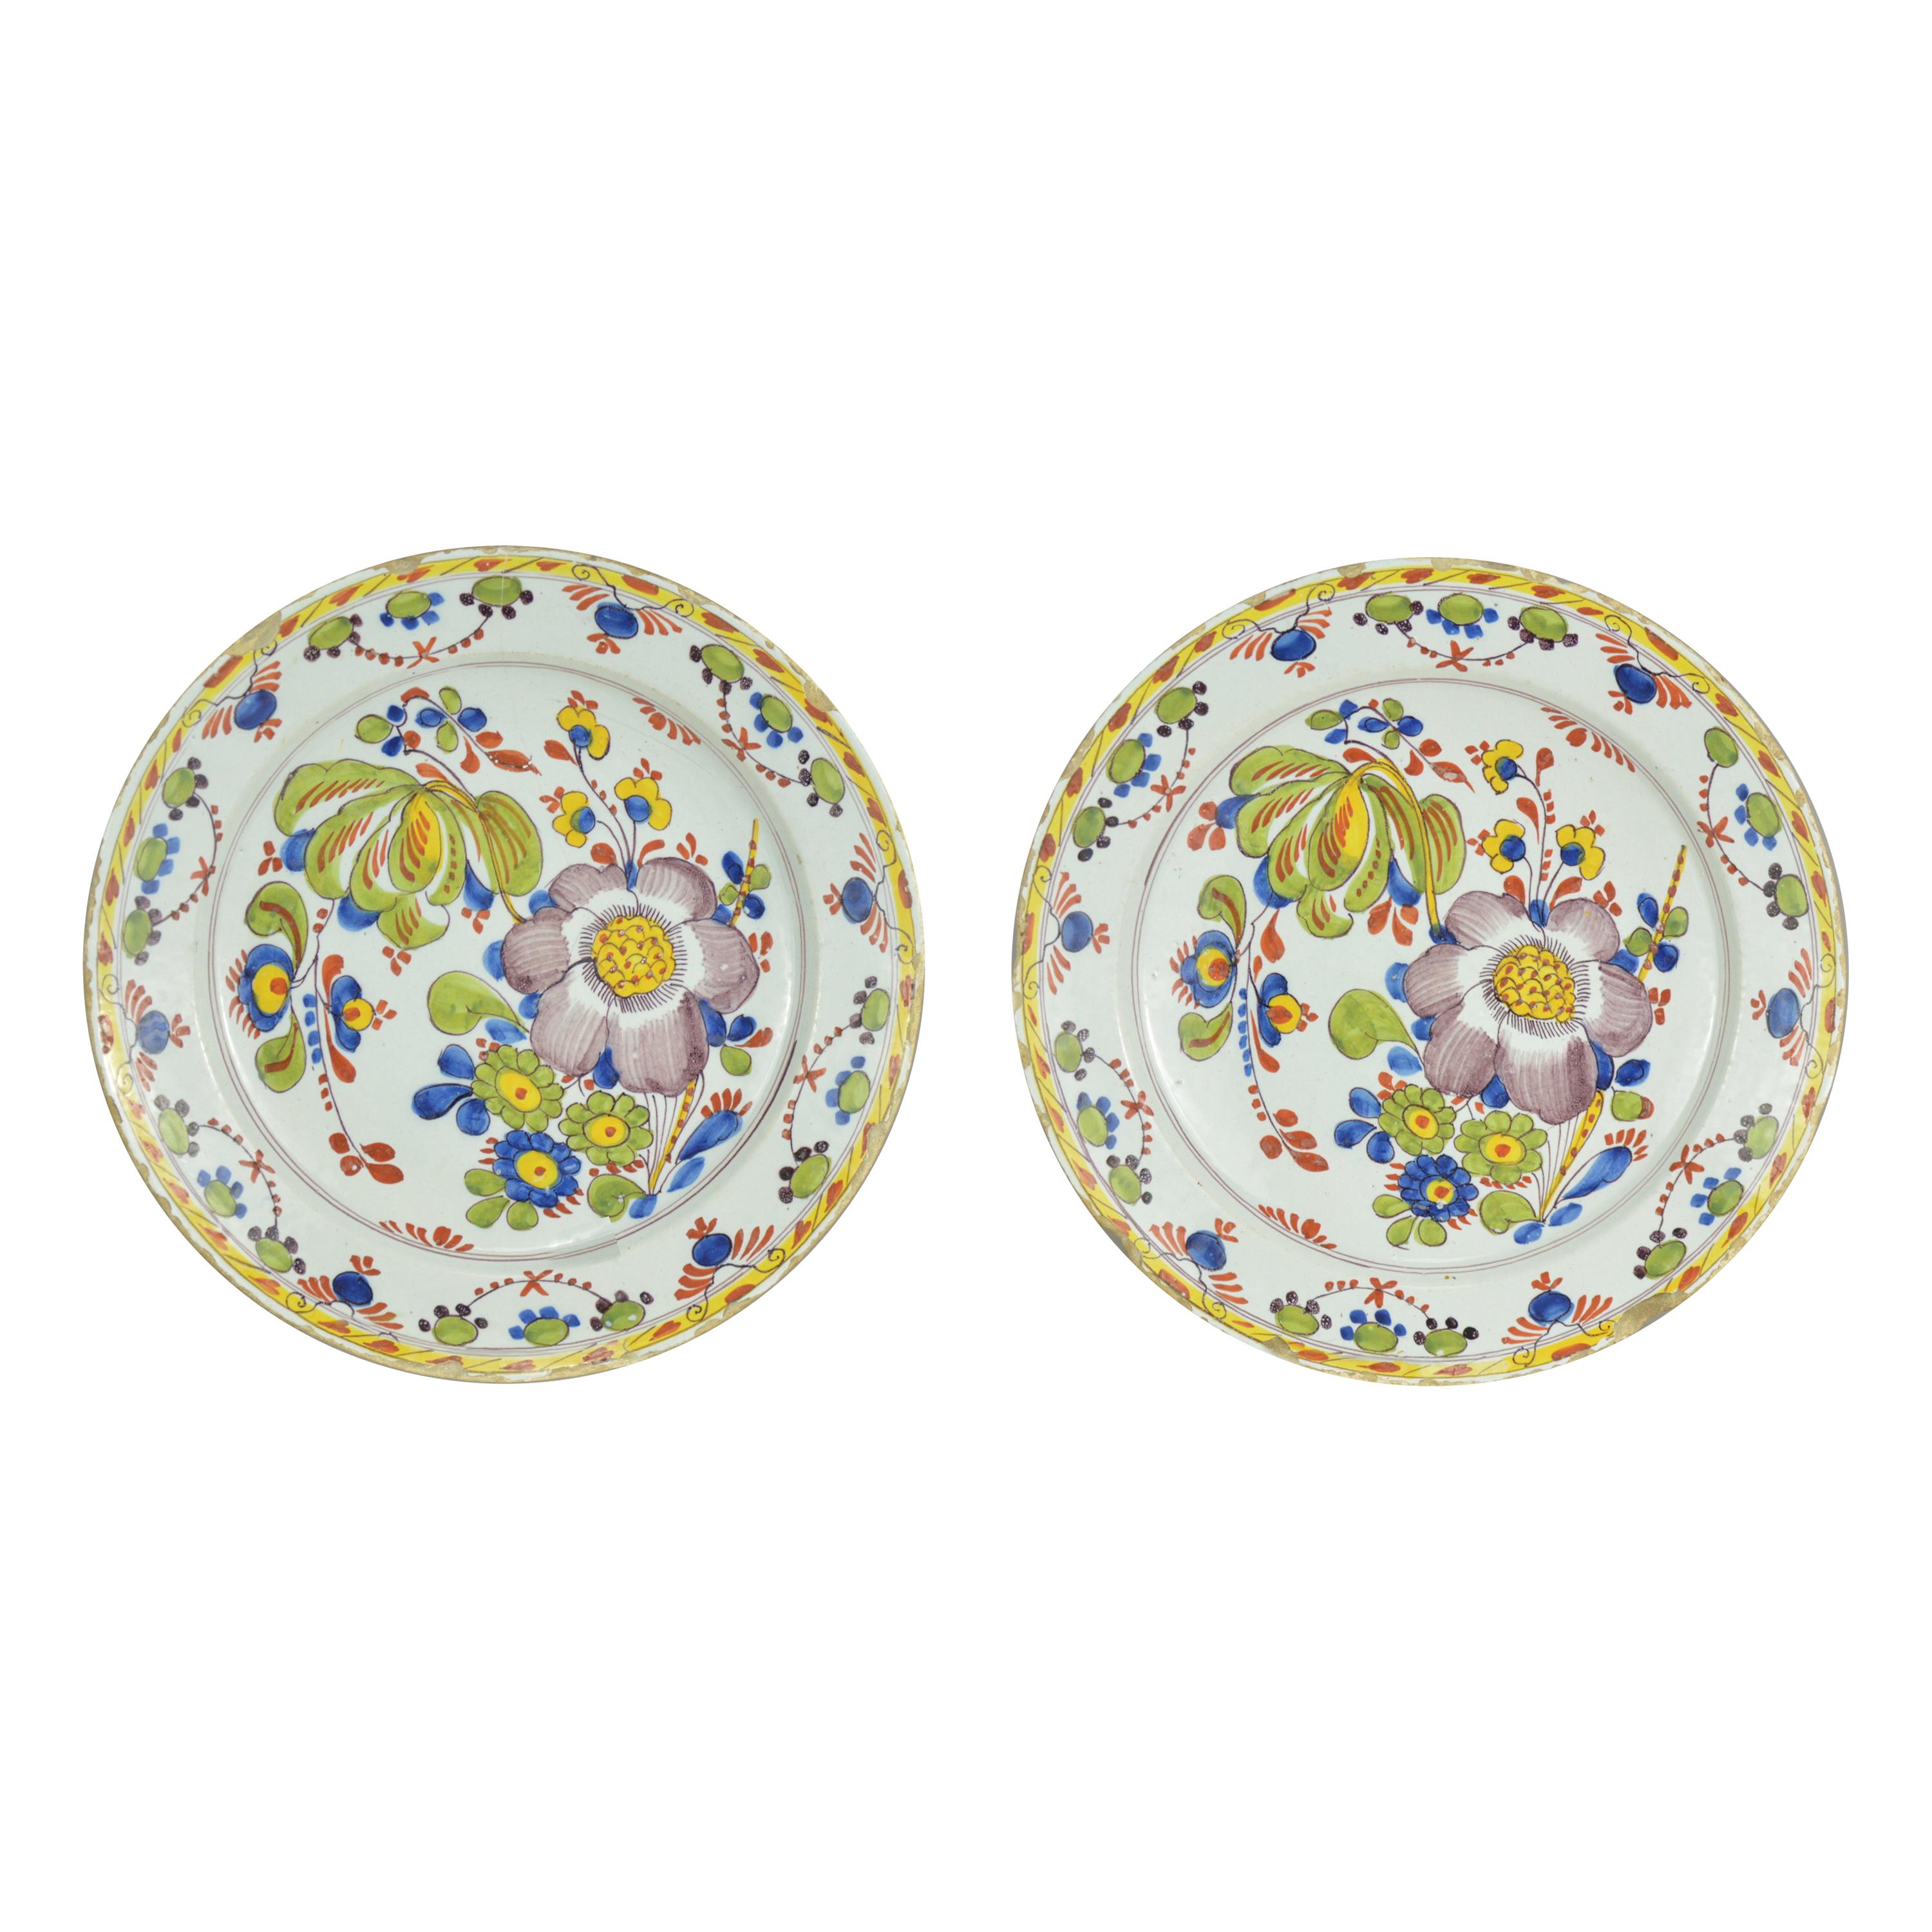 Pair of 18th Century Polychrome Delft Plates